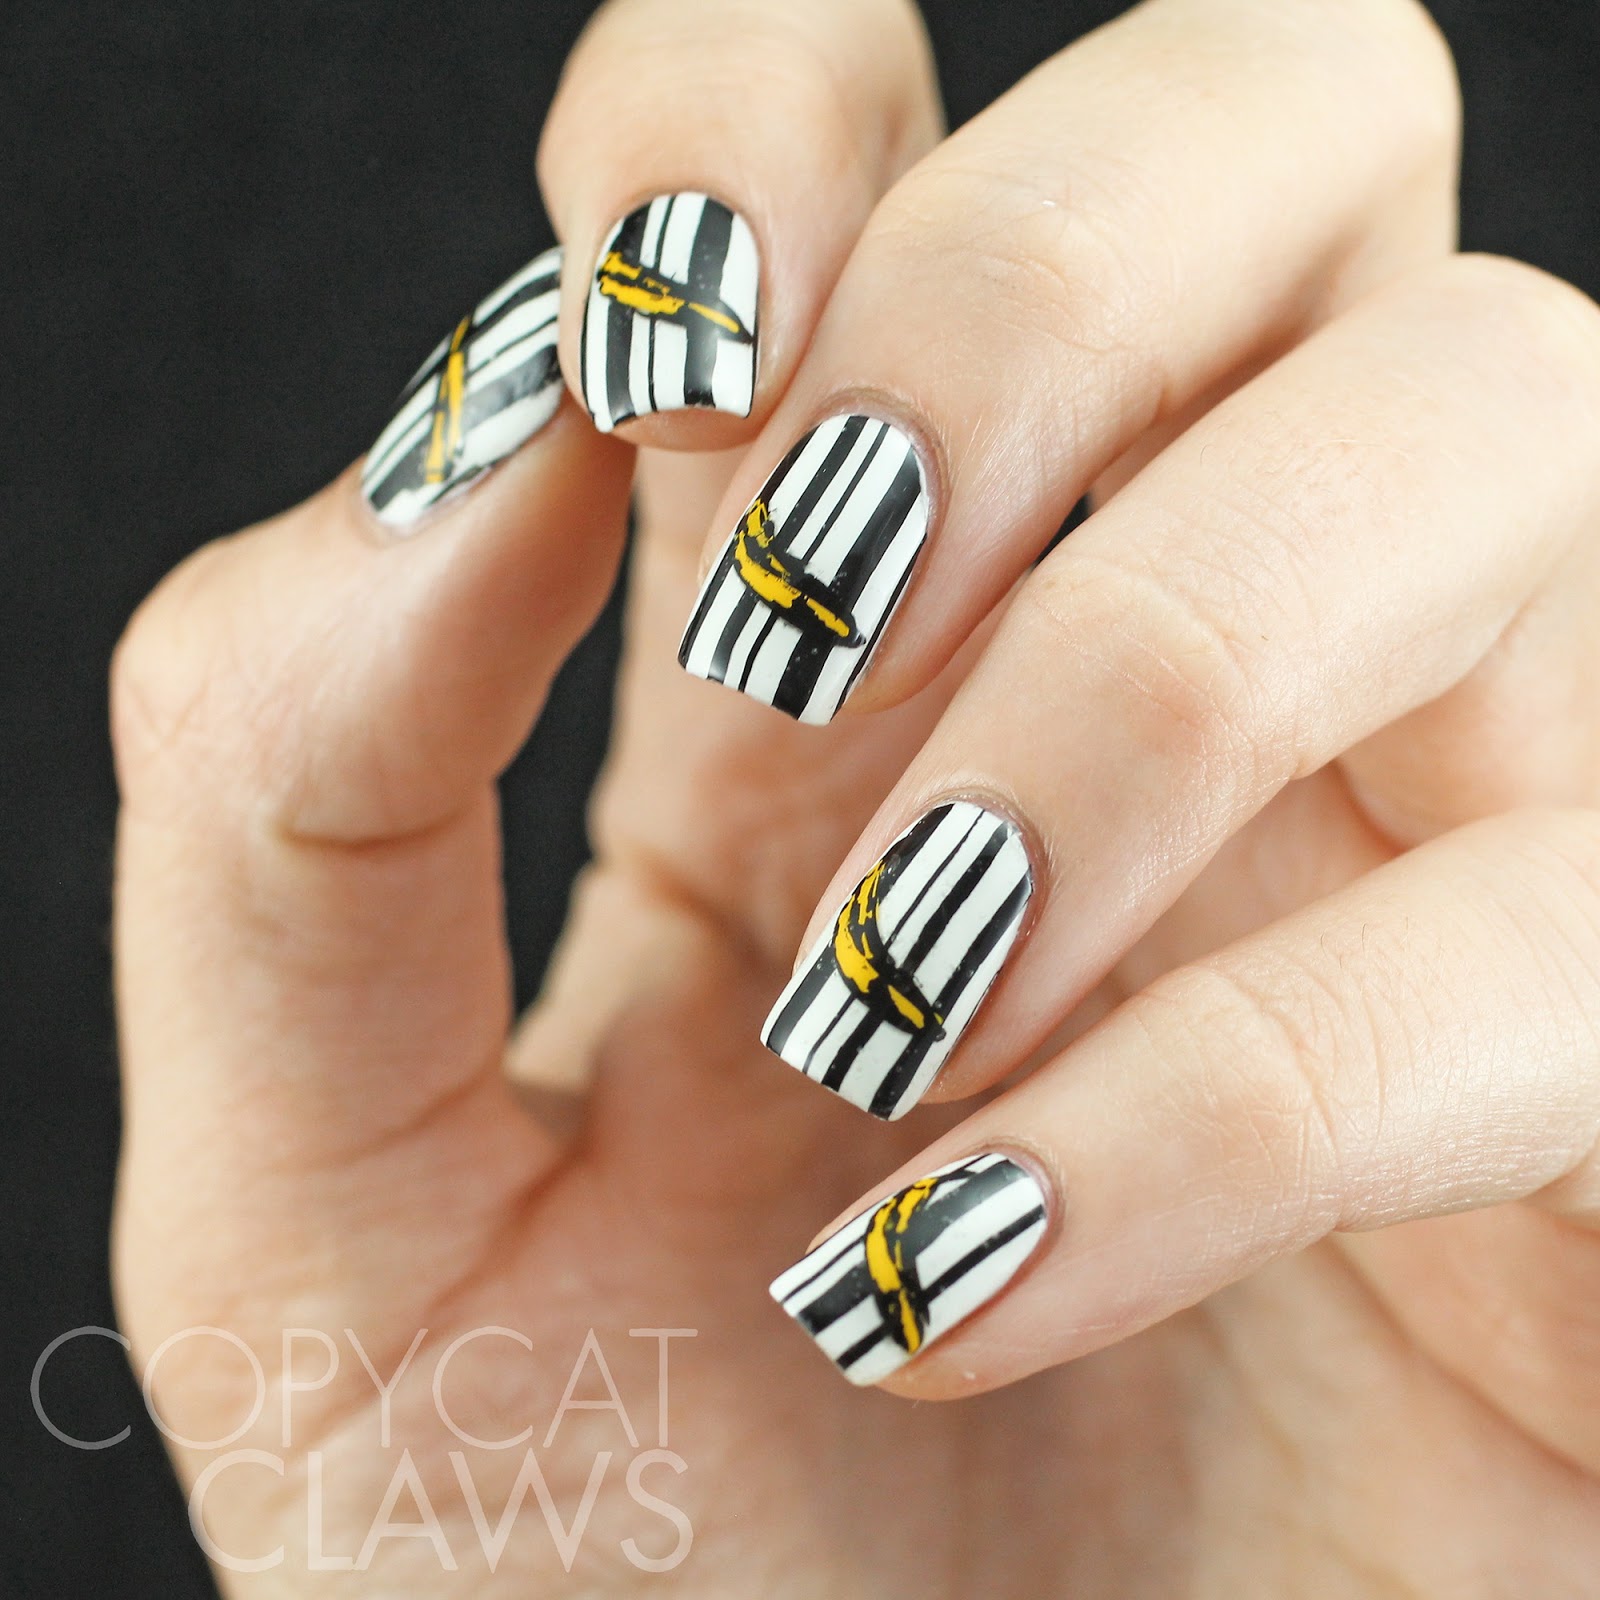 Copycat Claws: Sunday Stamping - Feeling Fruity